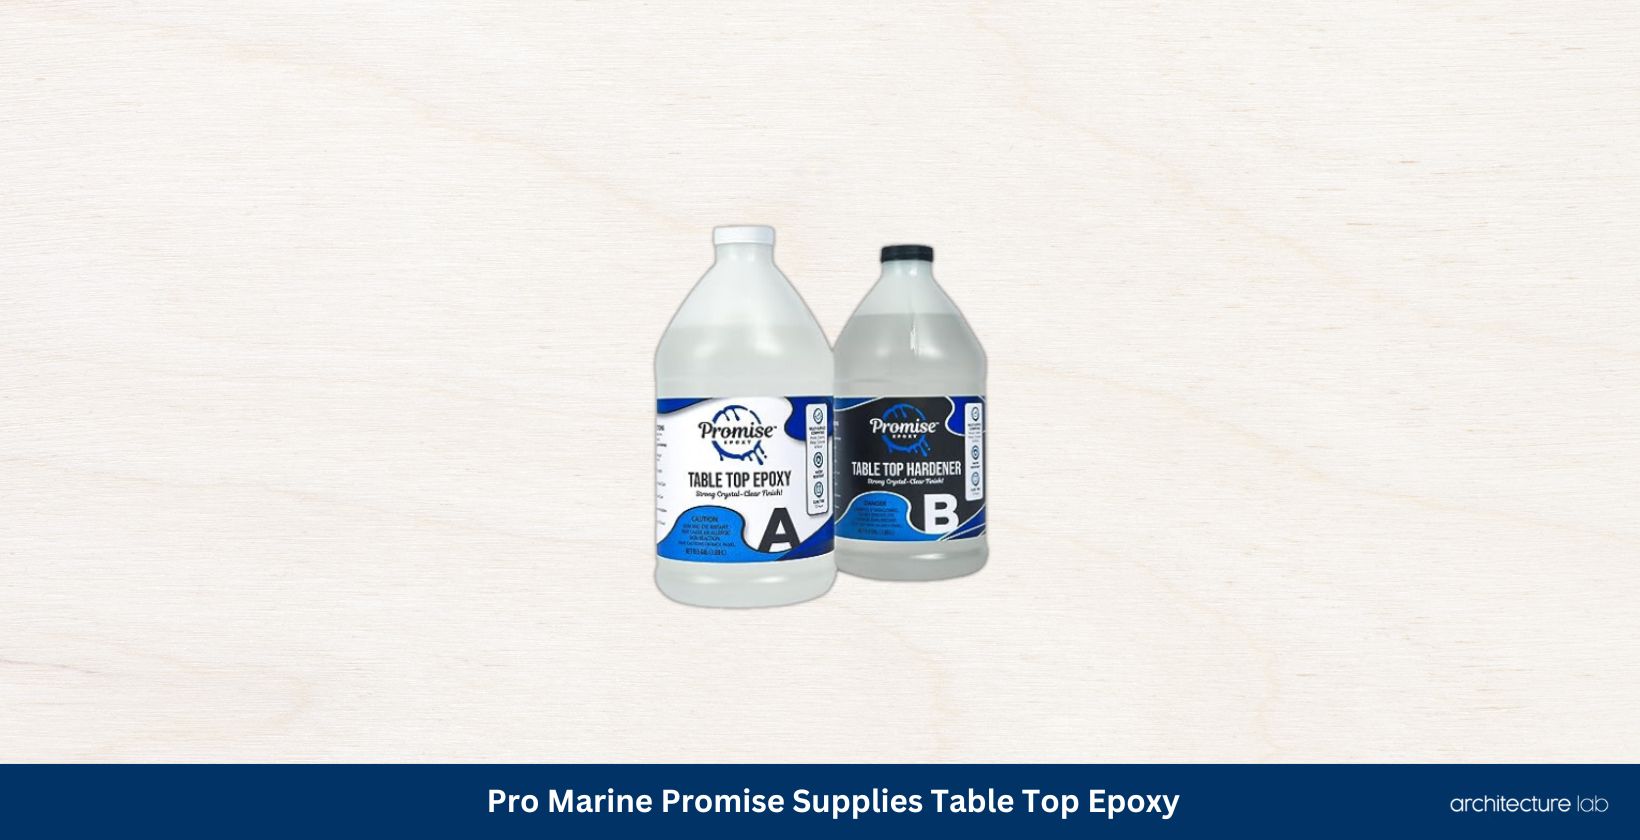 Pro marine promise supplies table top